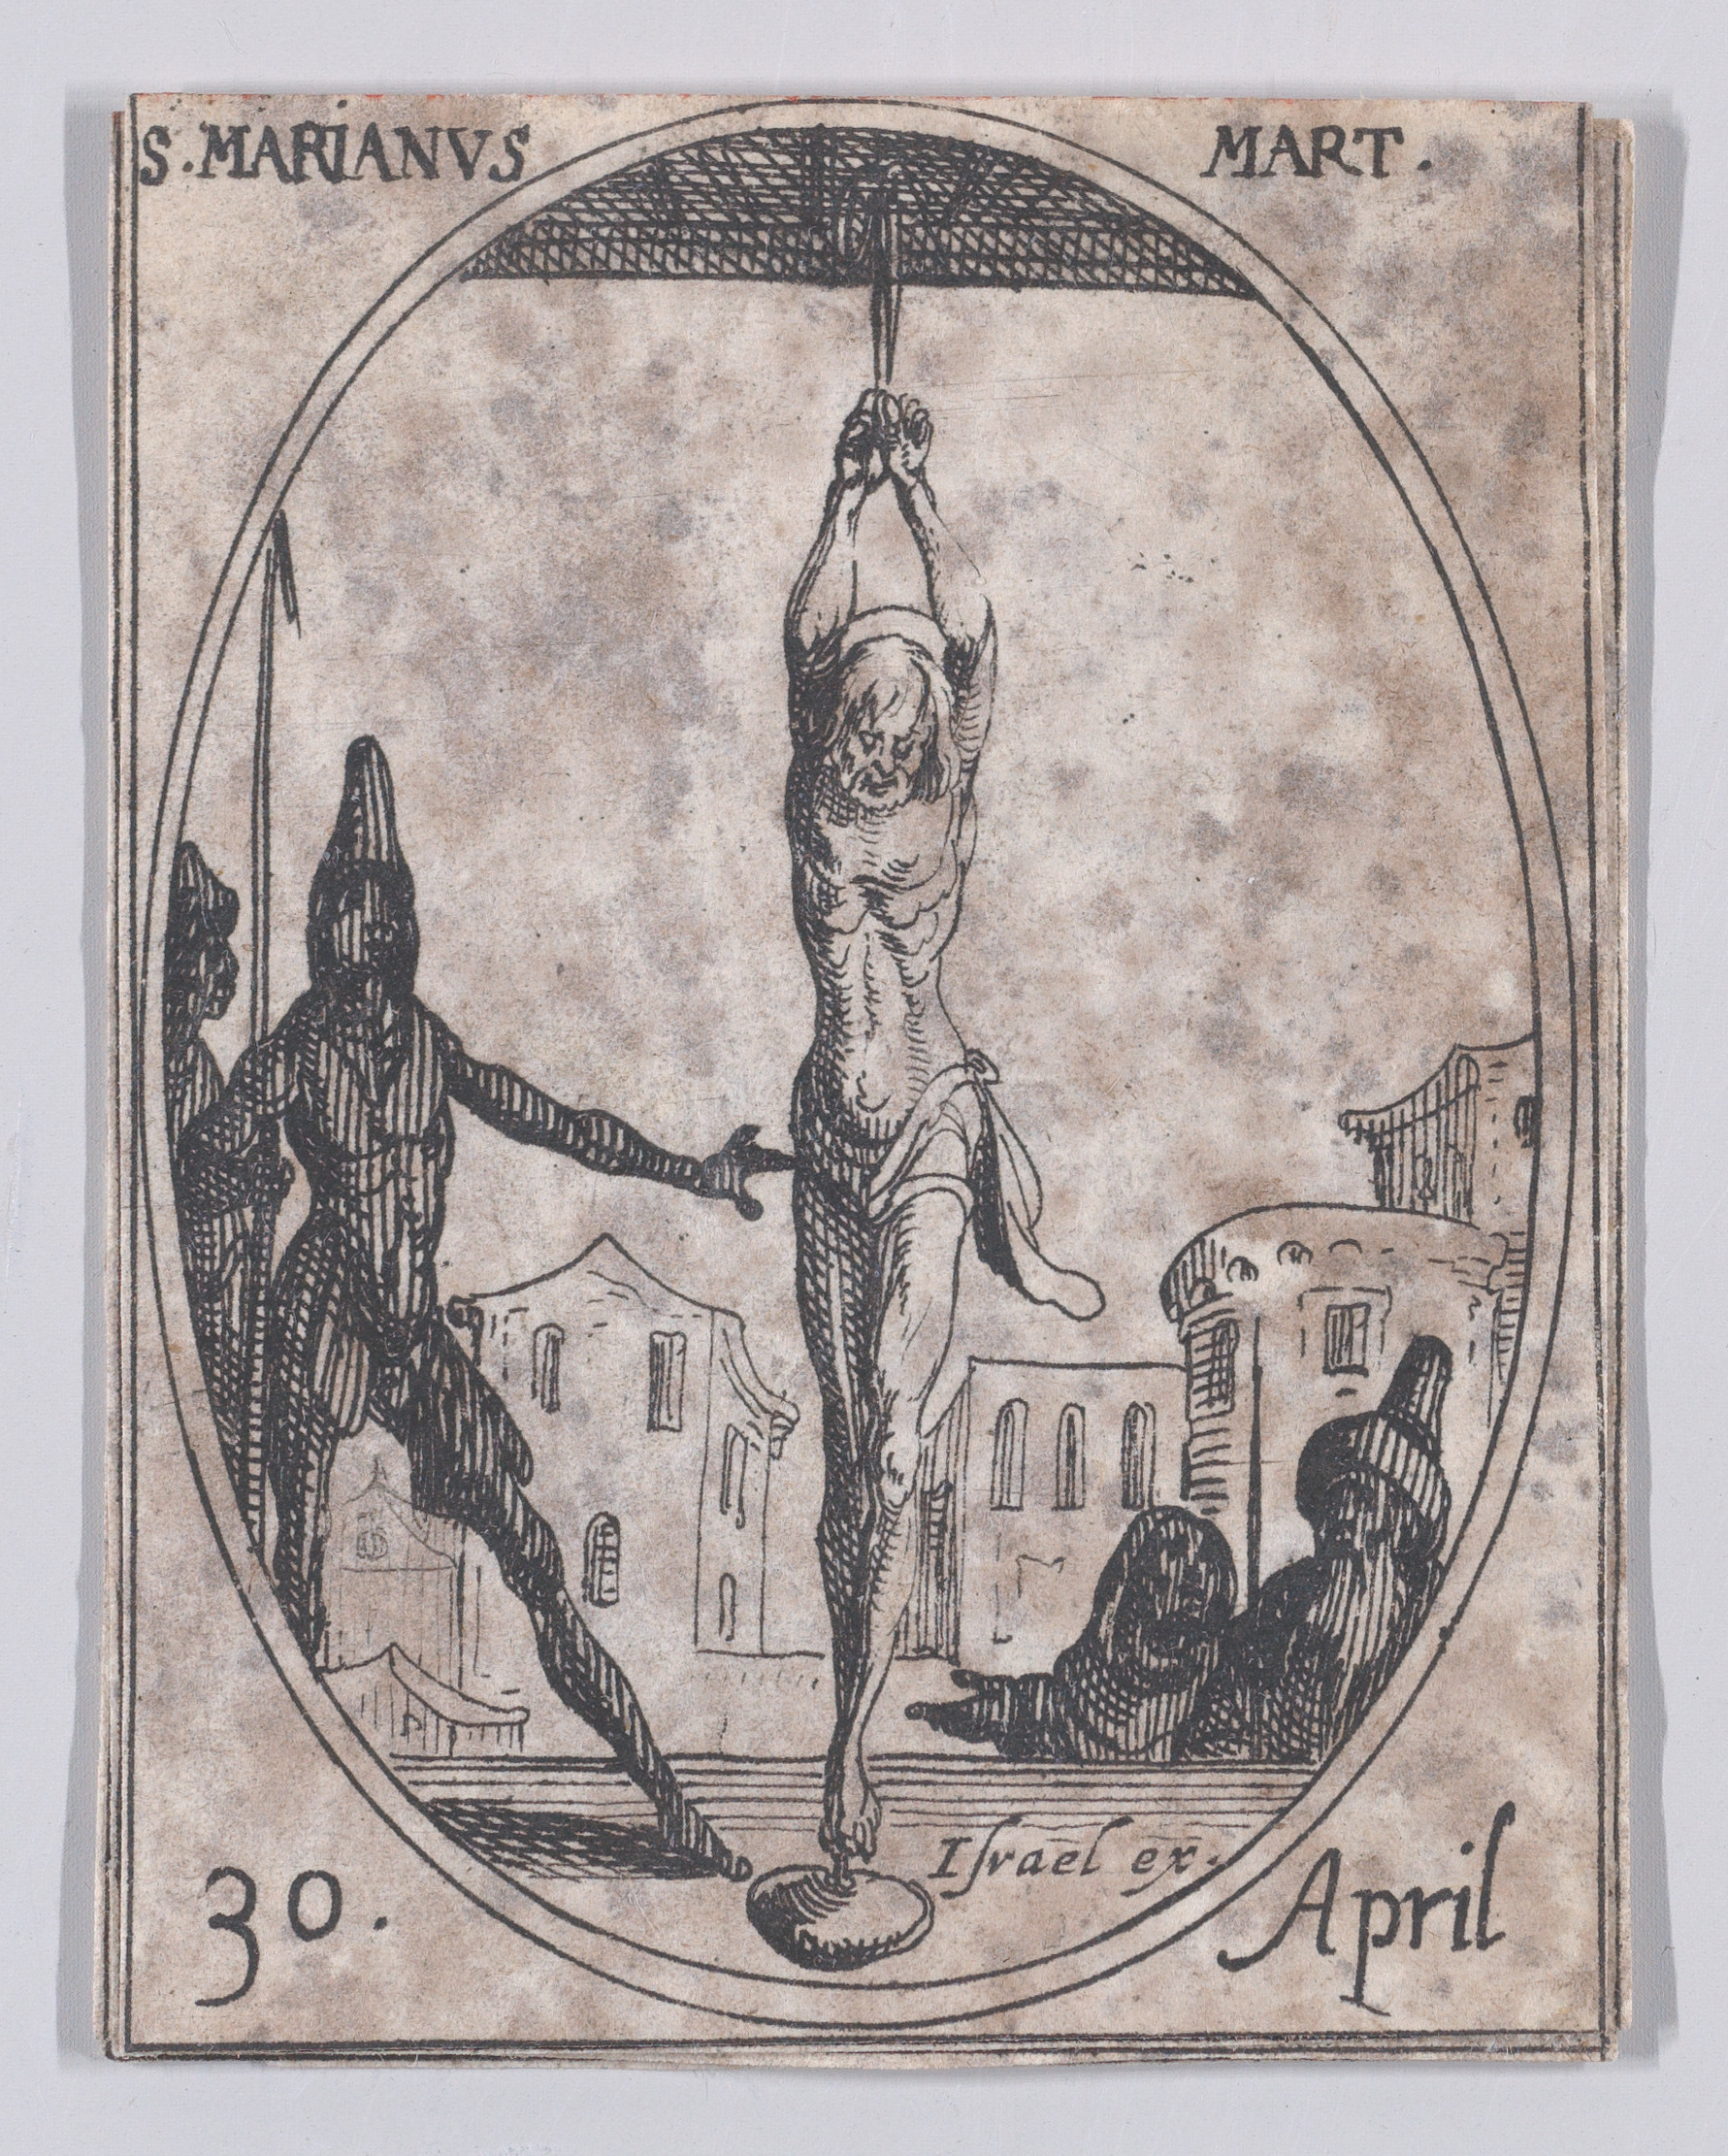 S. Marien, martyre (St. Marianus, Martyr), April 30th, from Les Images De Tous Les Saincts et Saintes de L'Année (Images of All of the Saints and Religious Events of the Year), Jacques Callot (French, Nancy 1592–1635 Nancy), Etching; second state of two (Lieure)